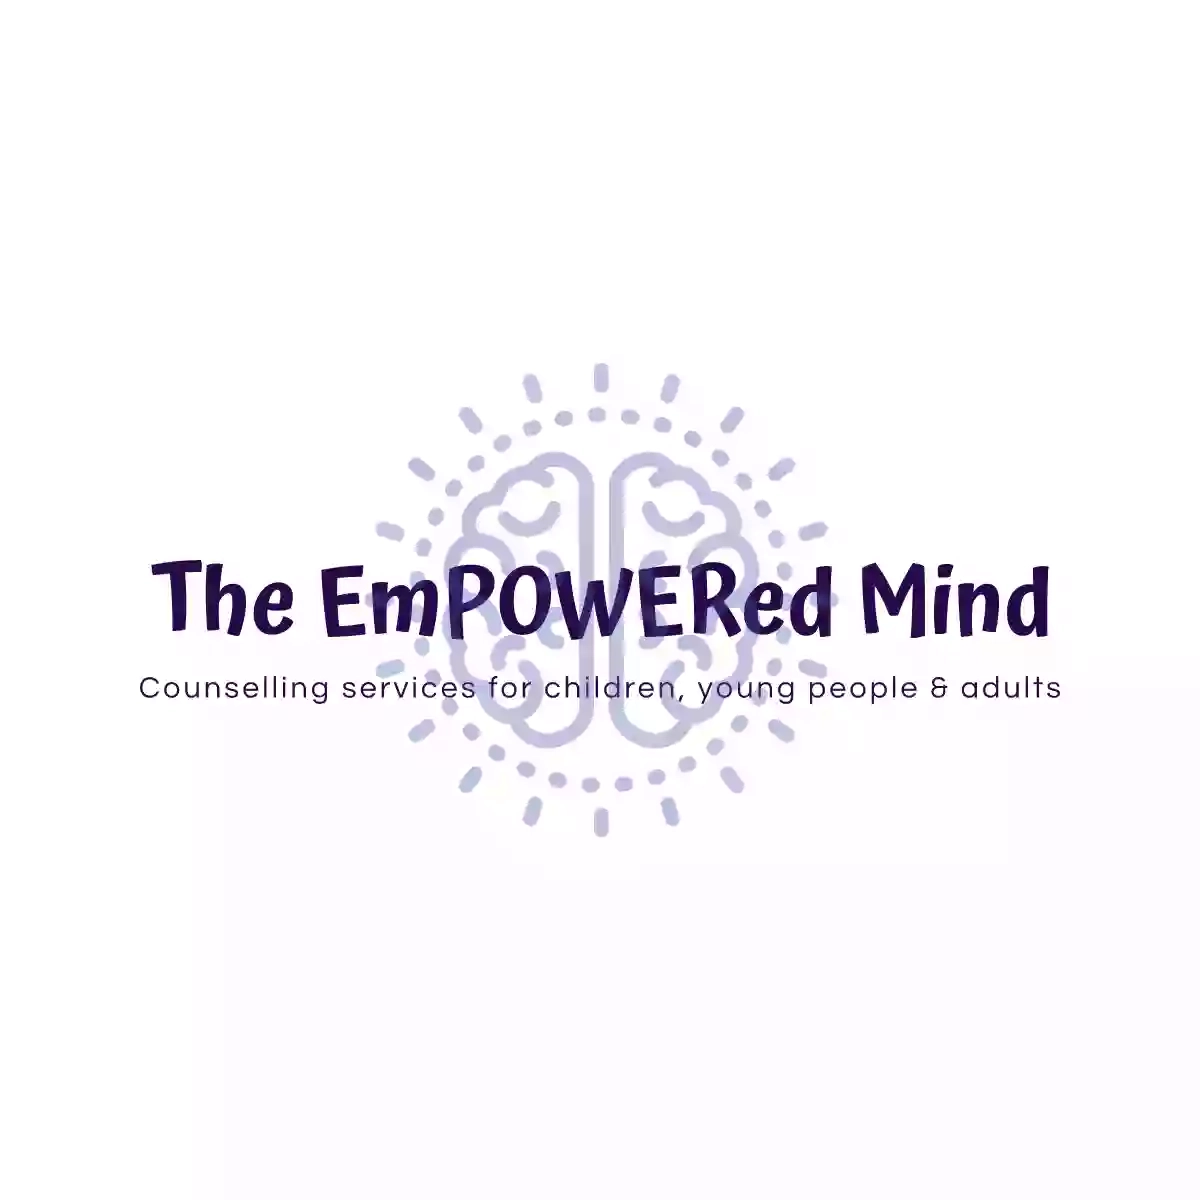 The EmPOWERed Mind